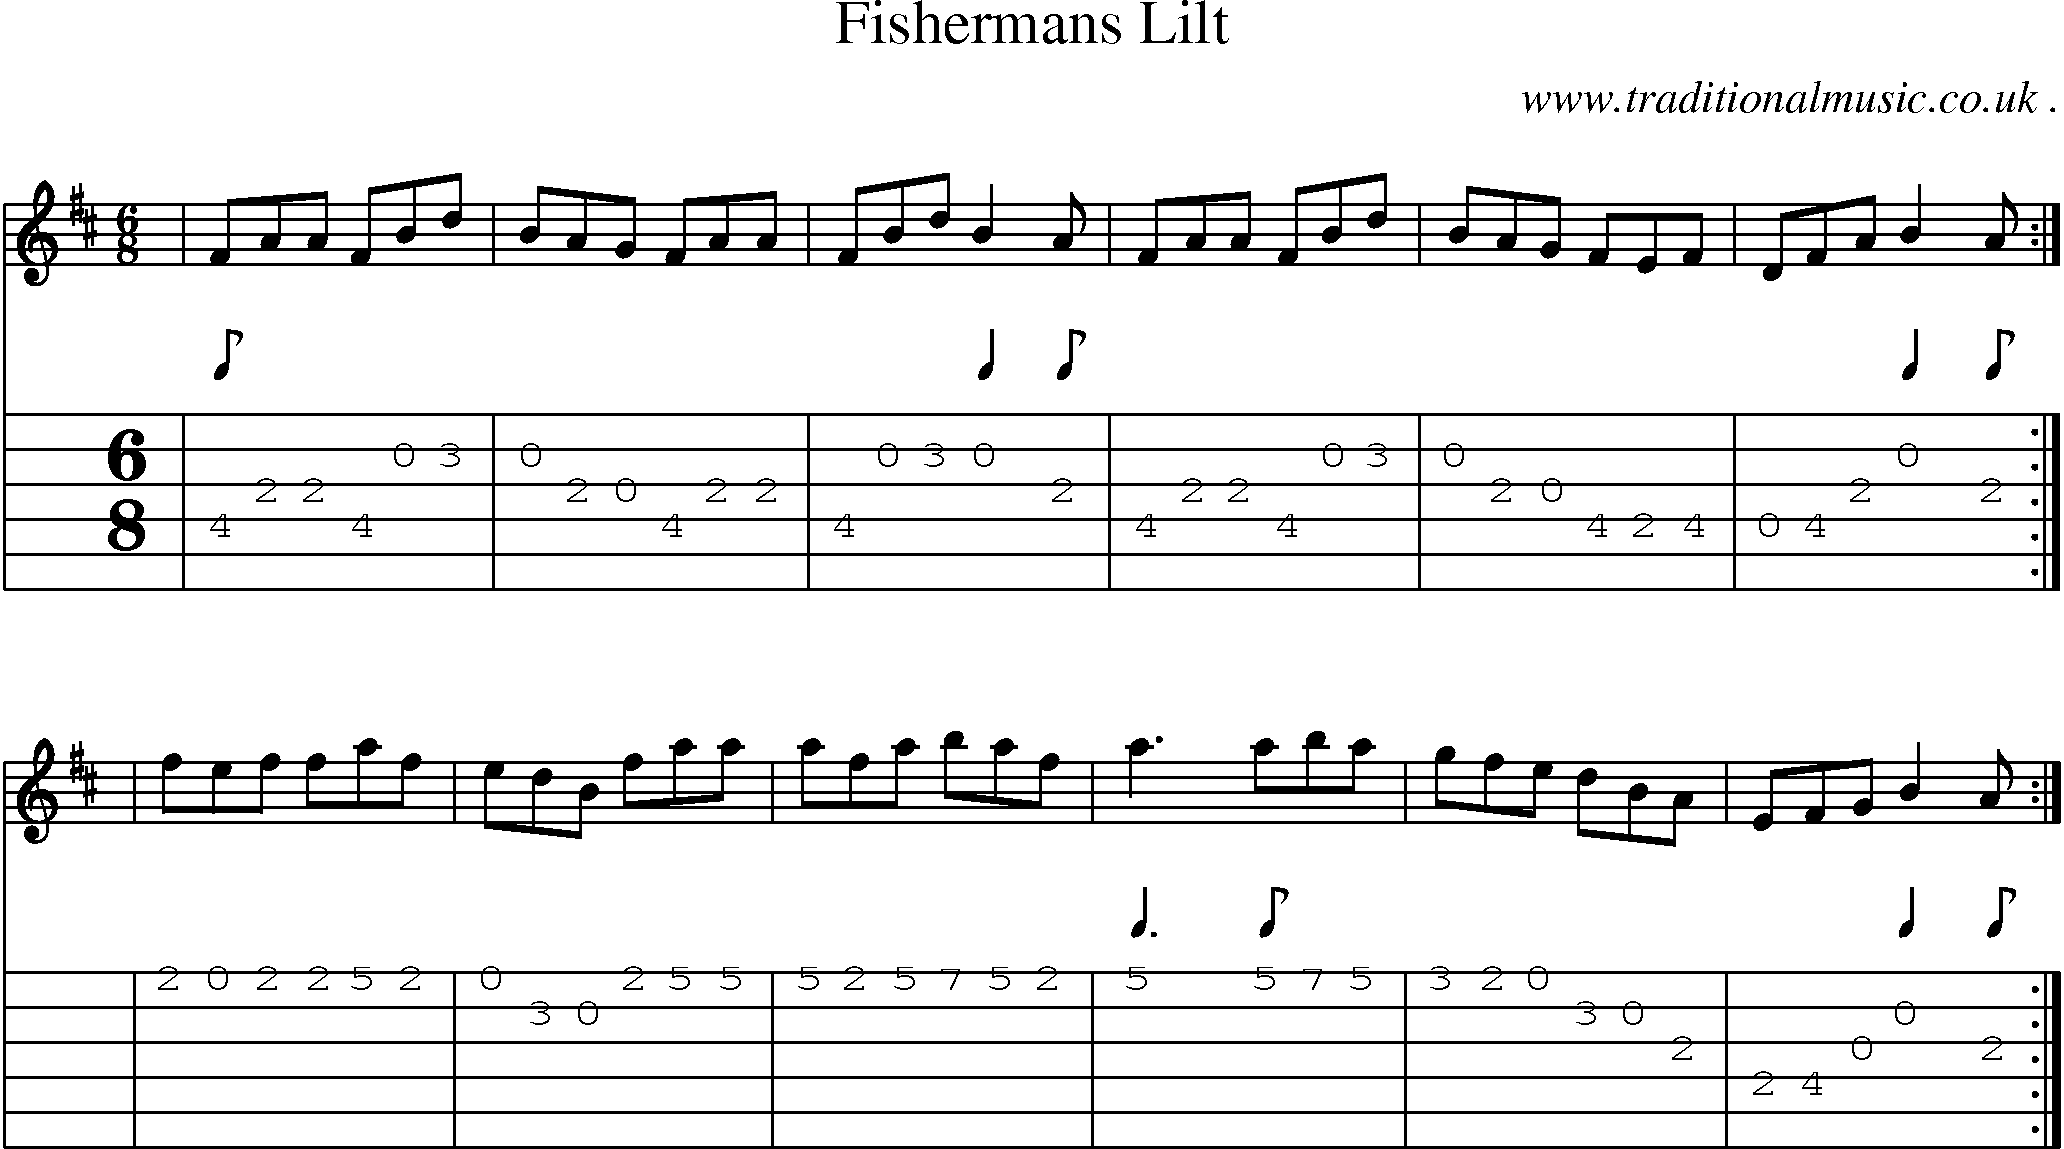 Sheet-Music and Guitar Tabs for Fishermans Lilt